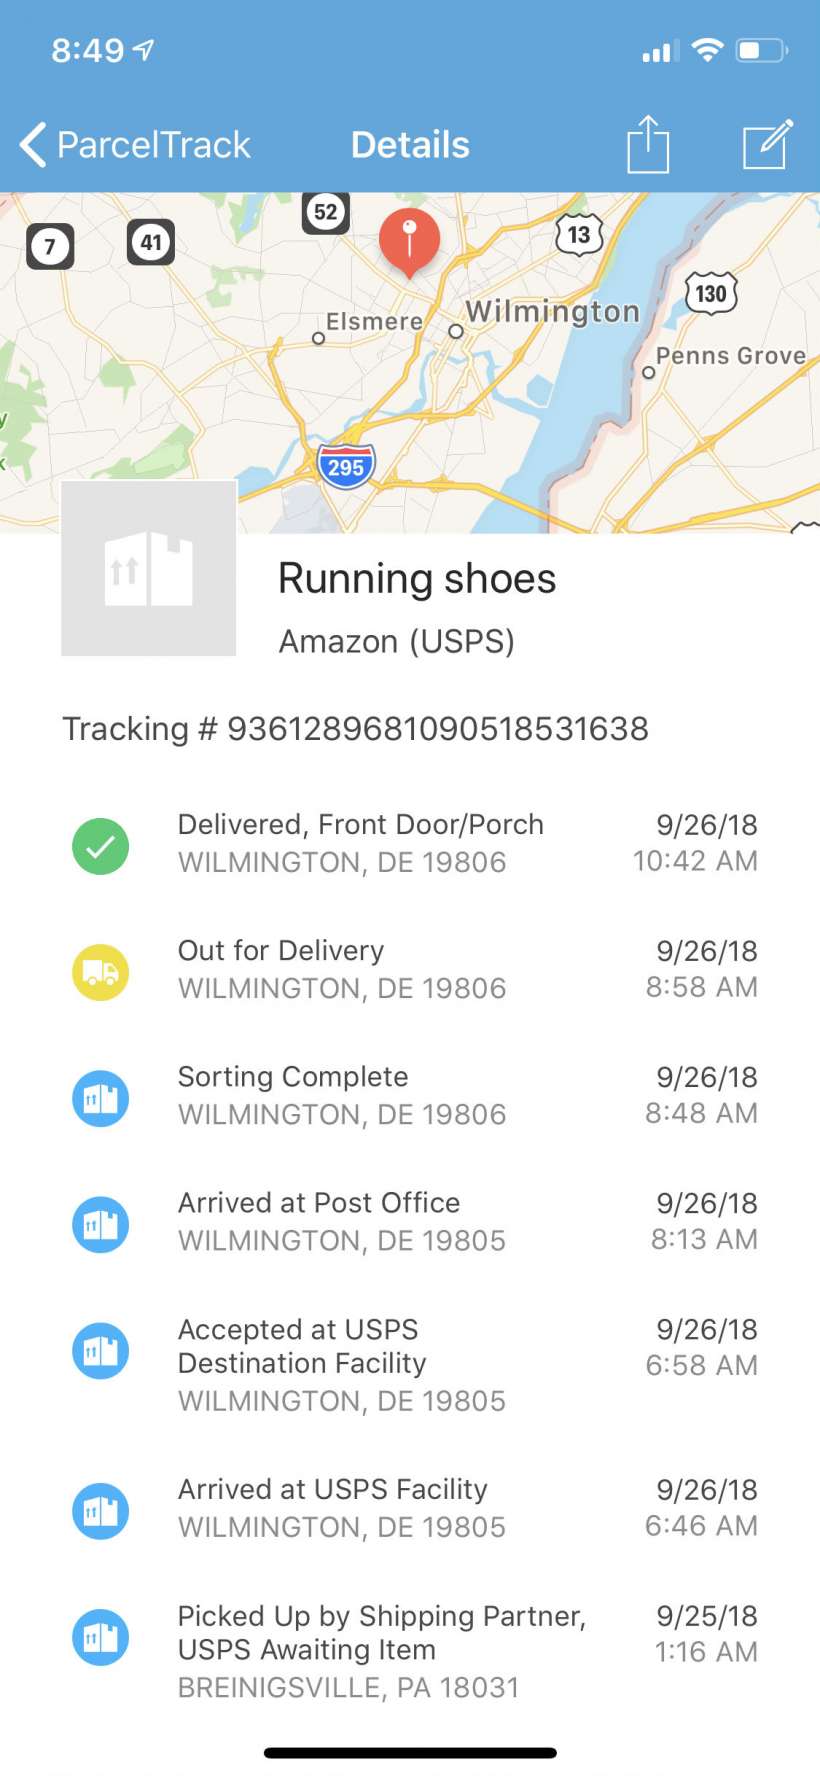 How to manage your UPS, FedEx, USPS and other shipments with ParcelTrack for iPhone and iPad.